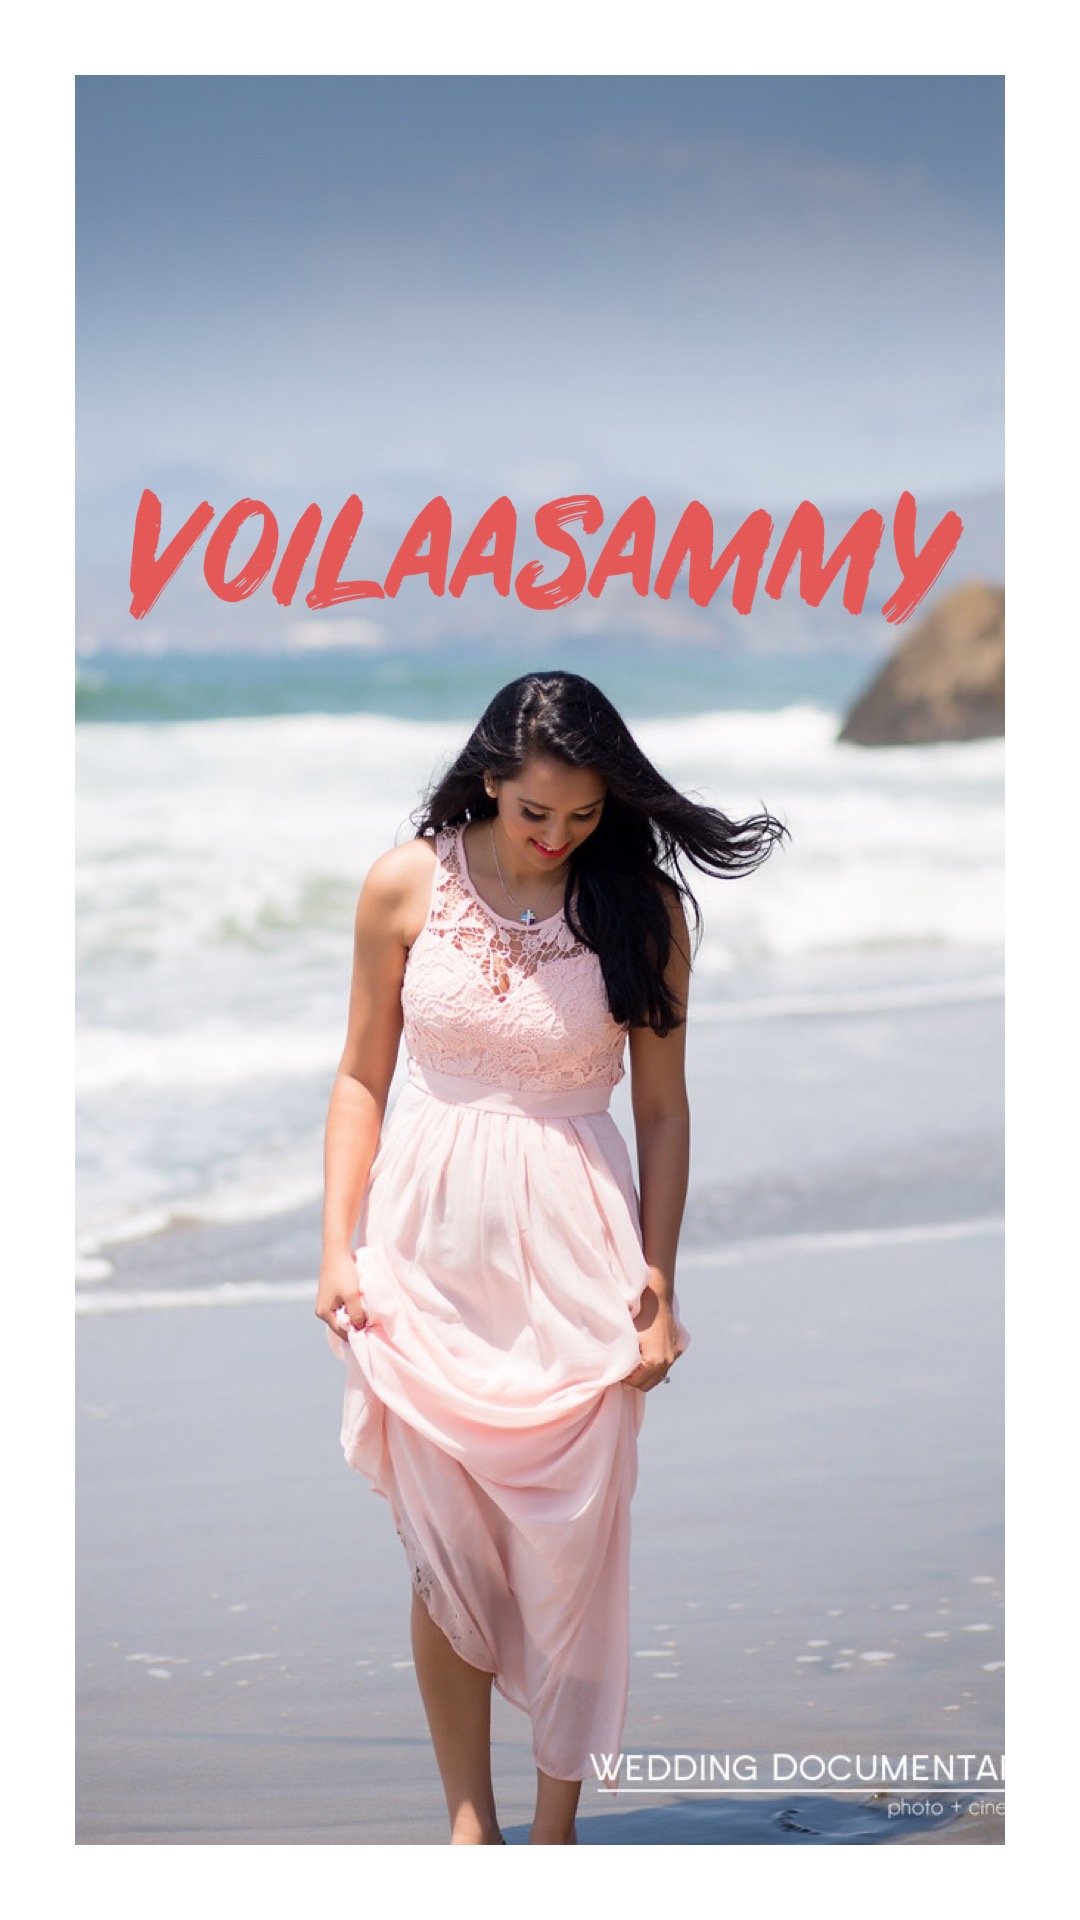 California based travel blogger. Come see the world with me. IG: Voilaasammy